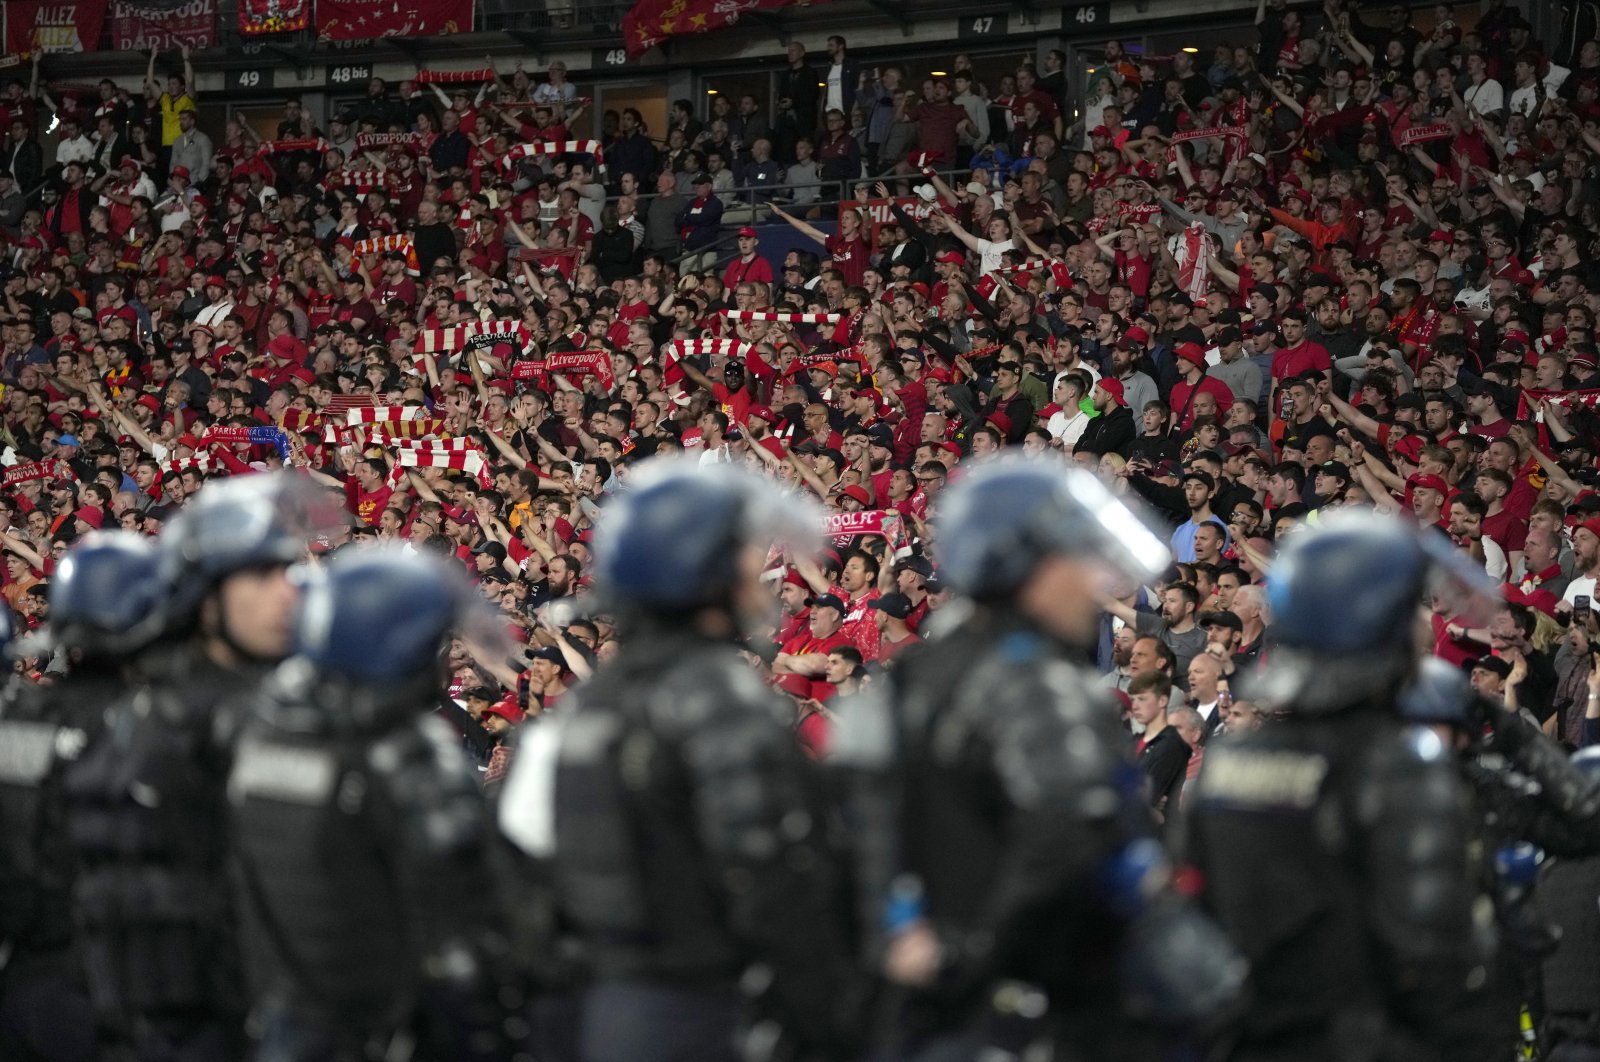 Riot police watch Liverpool fans during the Champions League final soccer match between Liverpool and Real Madrid at the Stade de France in Paris, France, May 28, 2022. (AP Photo)